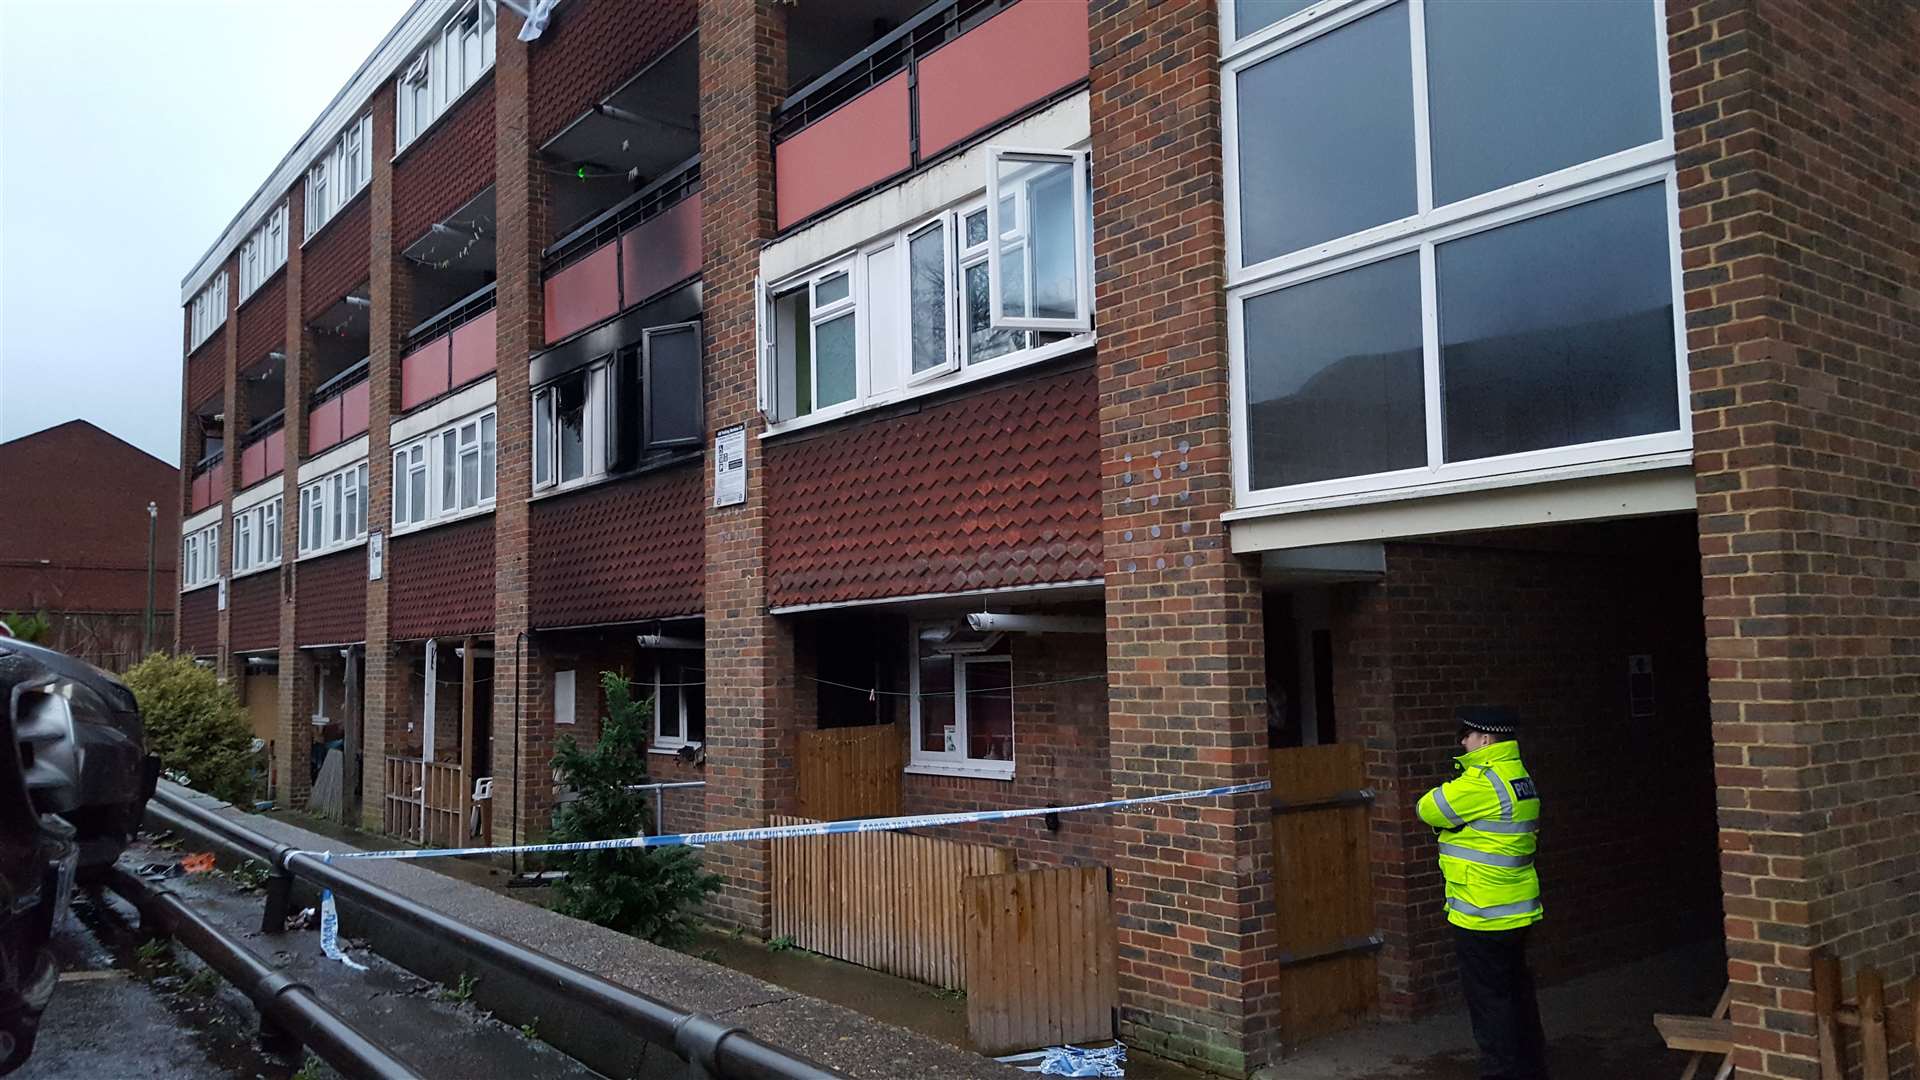 Judith Tucker died in a fire at Walshaw House, Maidstone on December 18